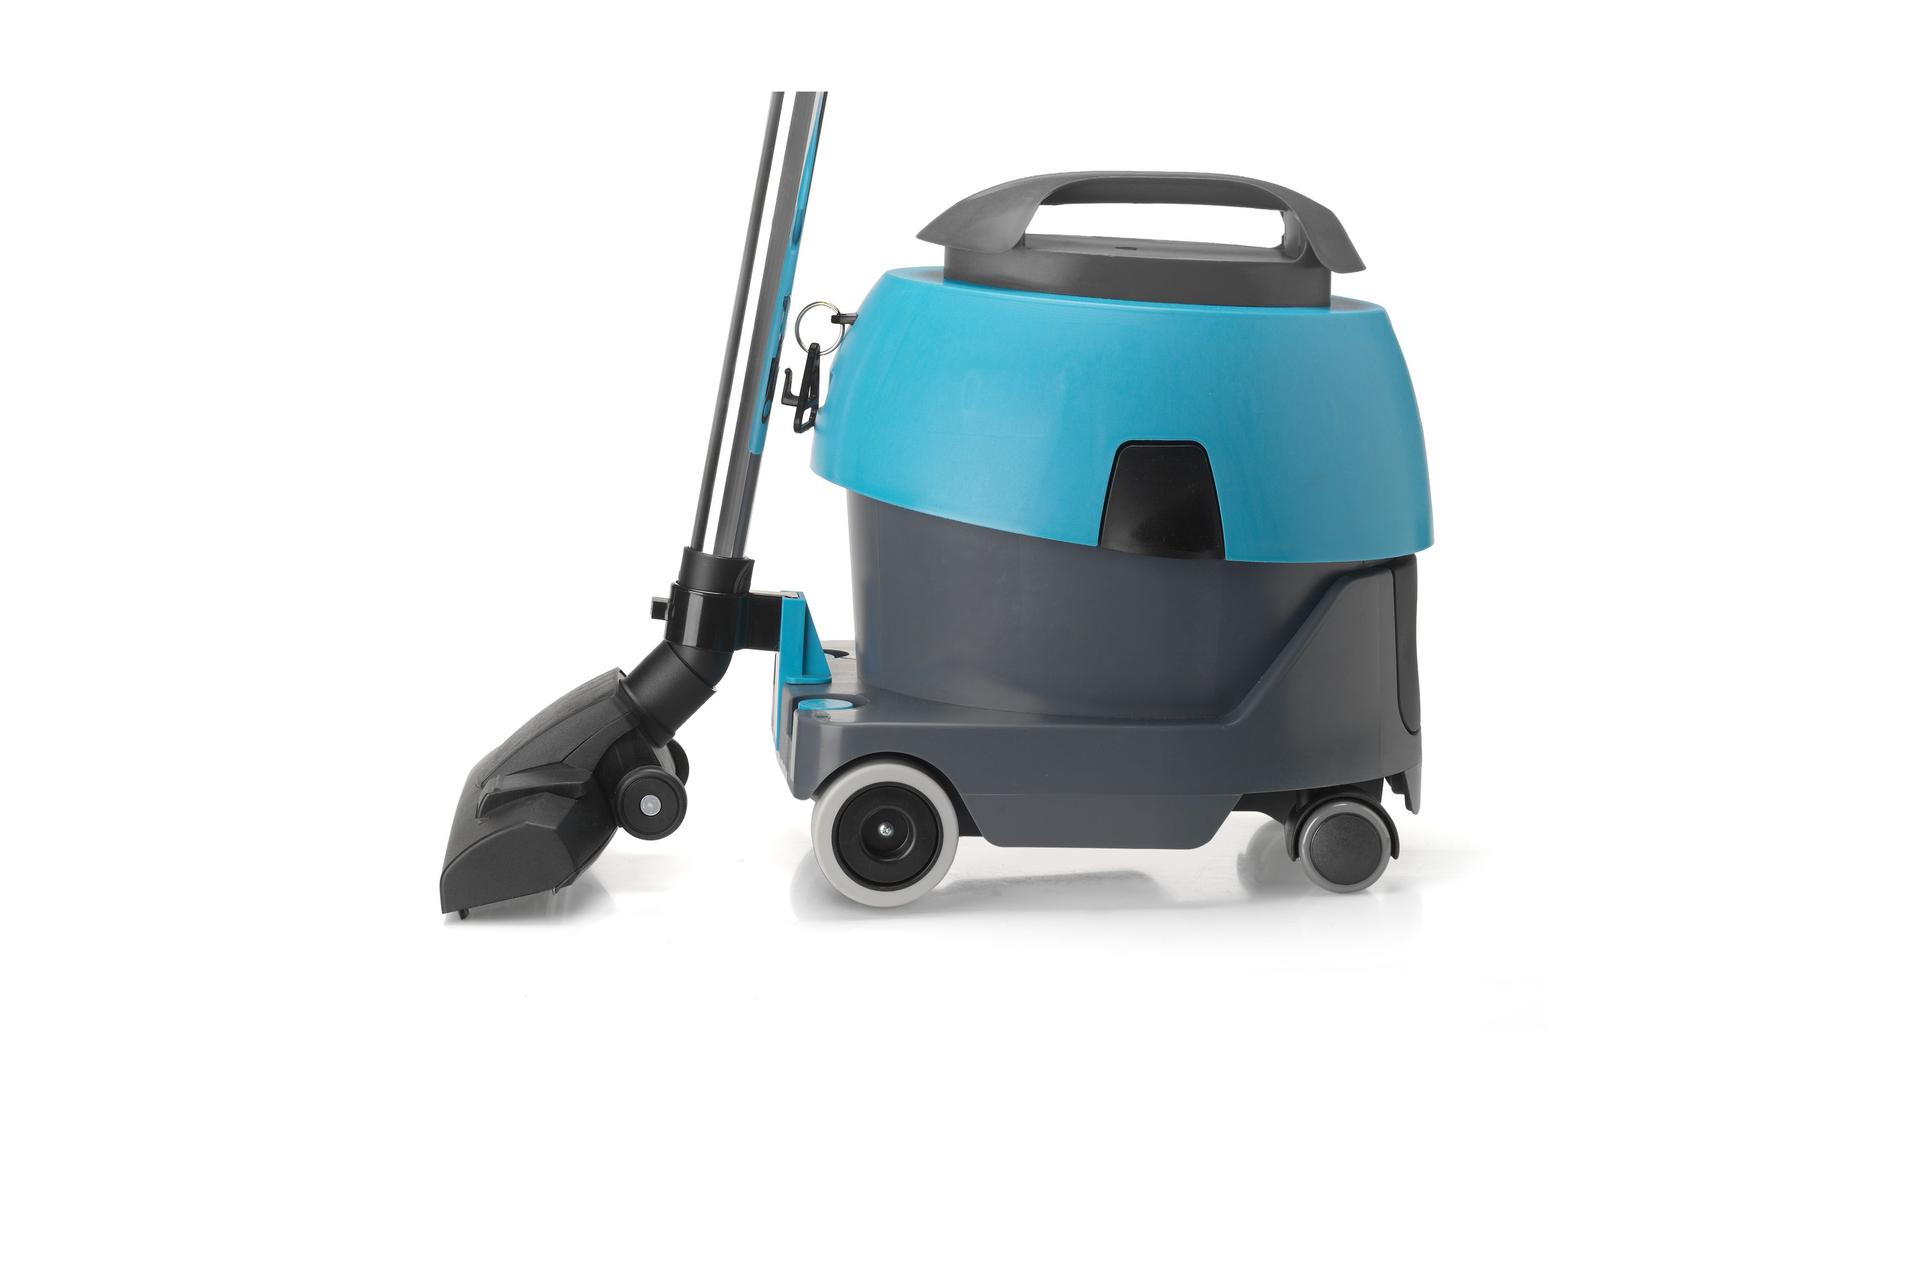 i-team's Vacuums - a Powerful commercial vacuum range